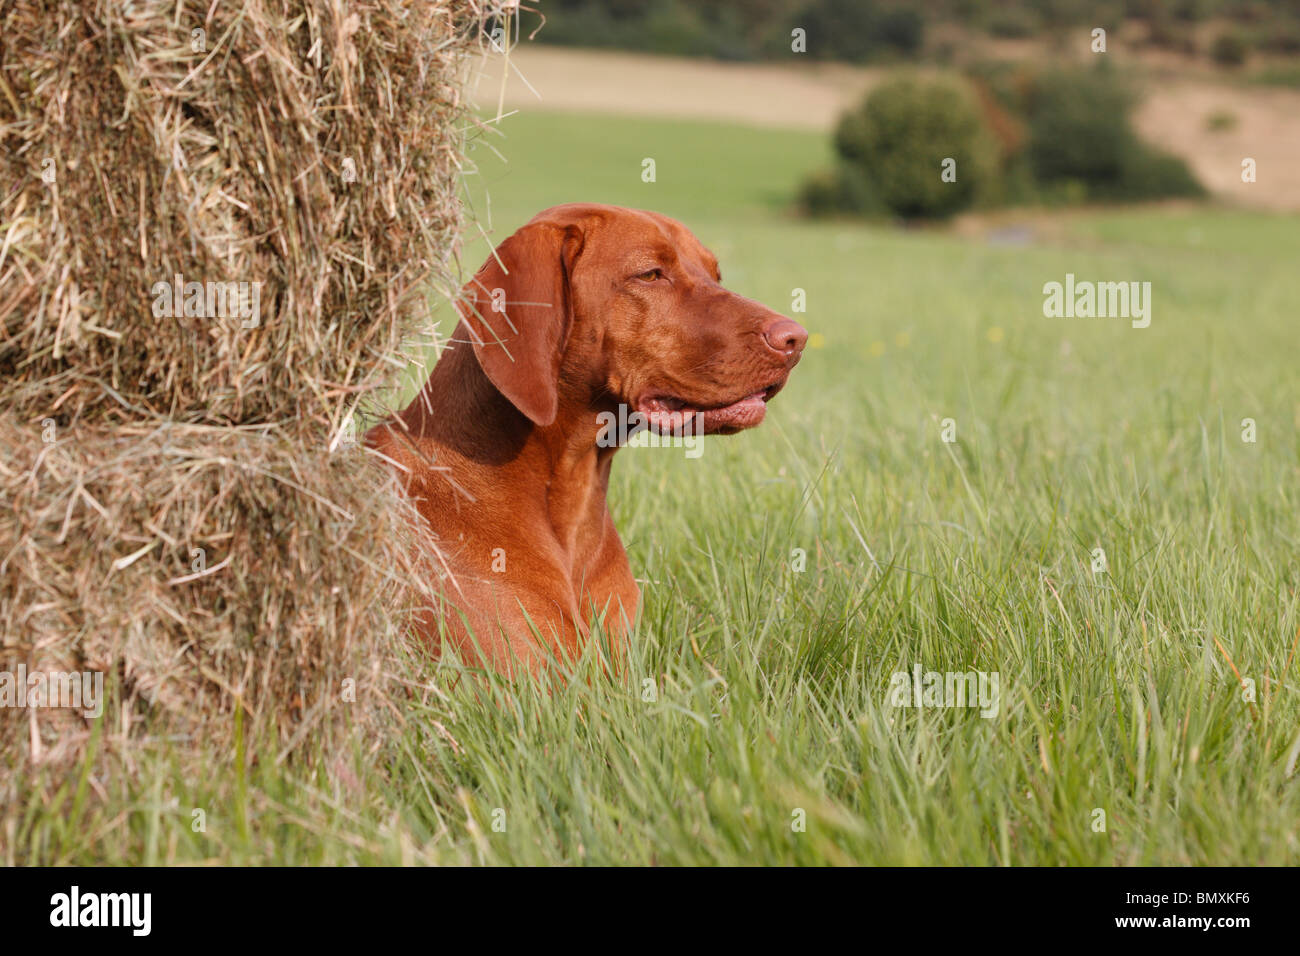 Hungarian Short-haired Pointing Dog (Canis lupus f. familiaris), lying in a meadow behind hay bales Stock Photo